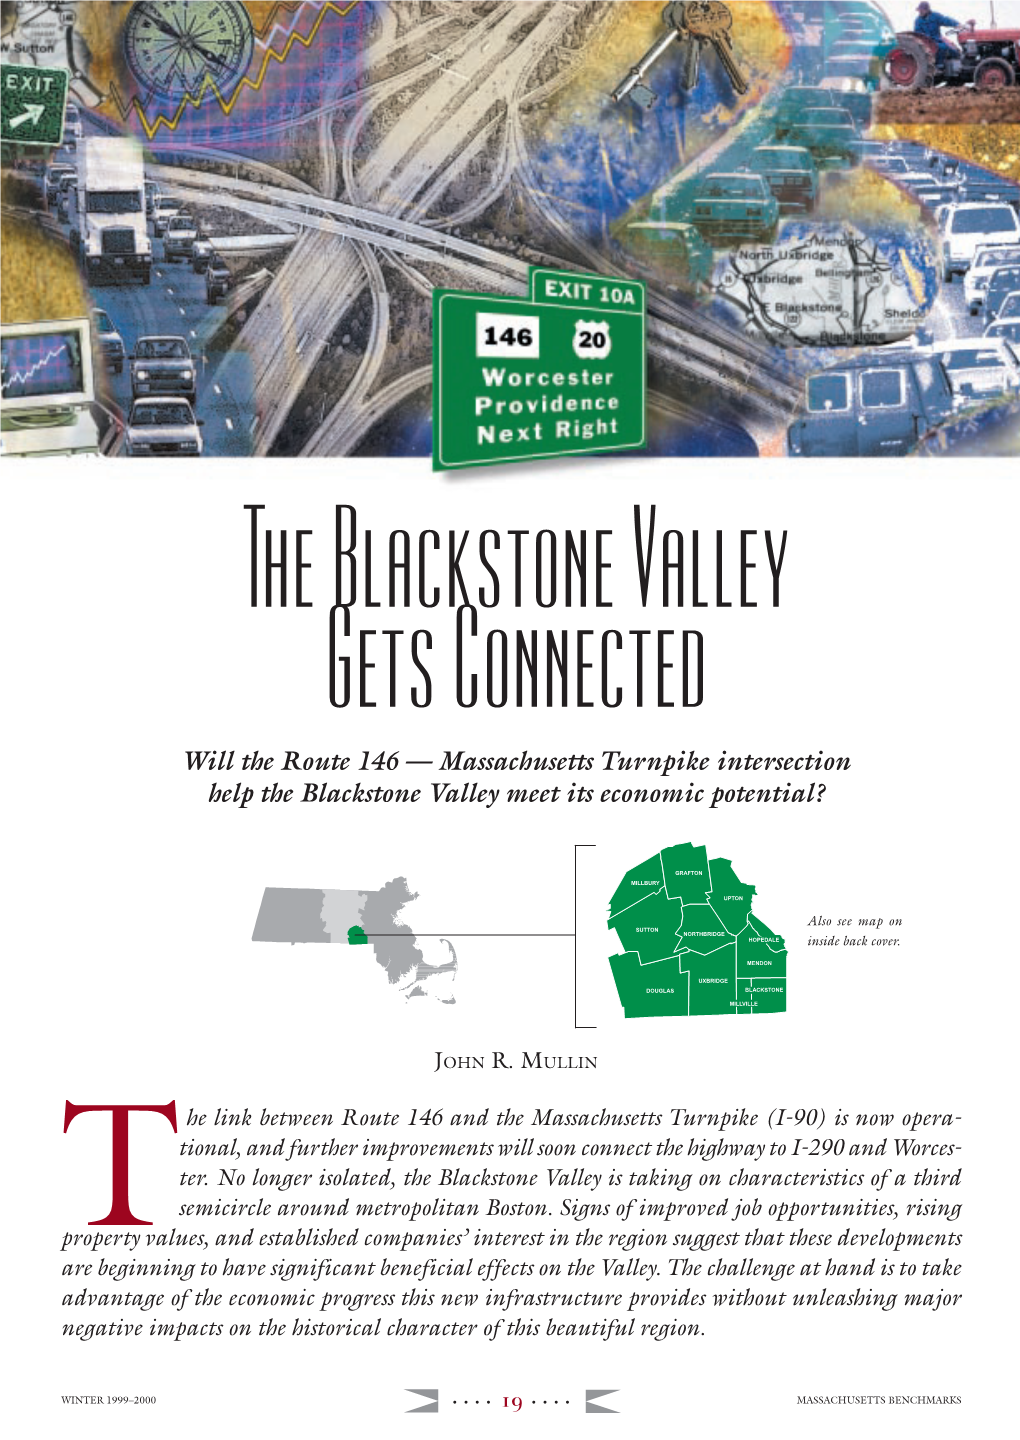 The Blackstone Valley Gets Connected